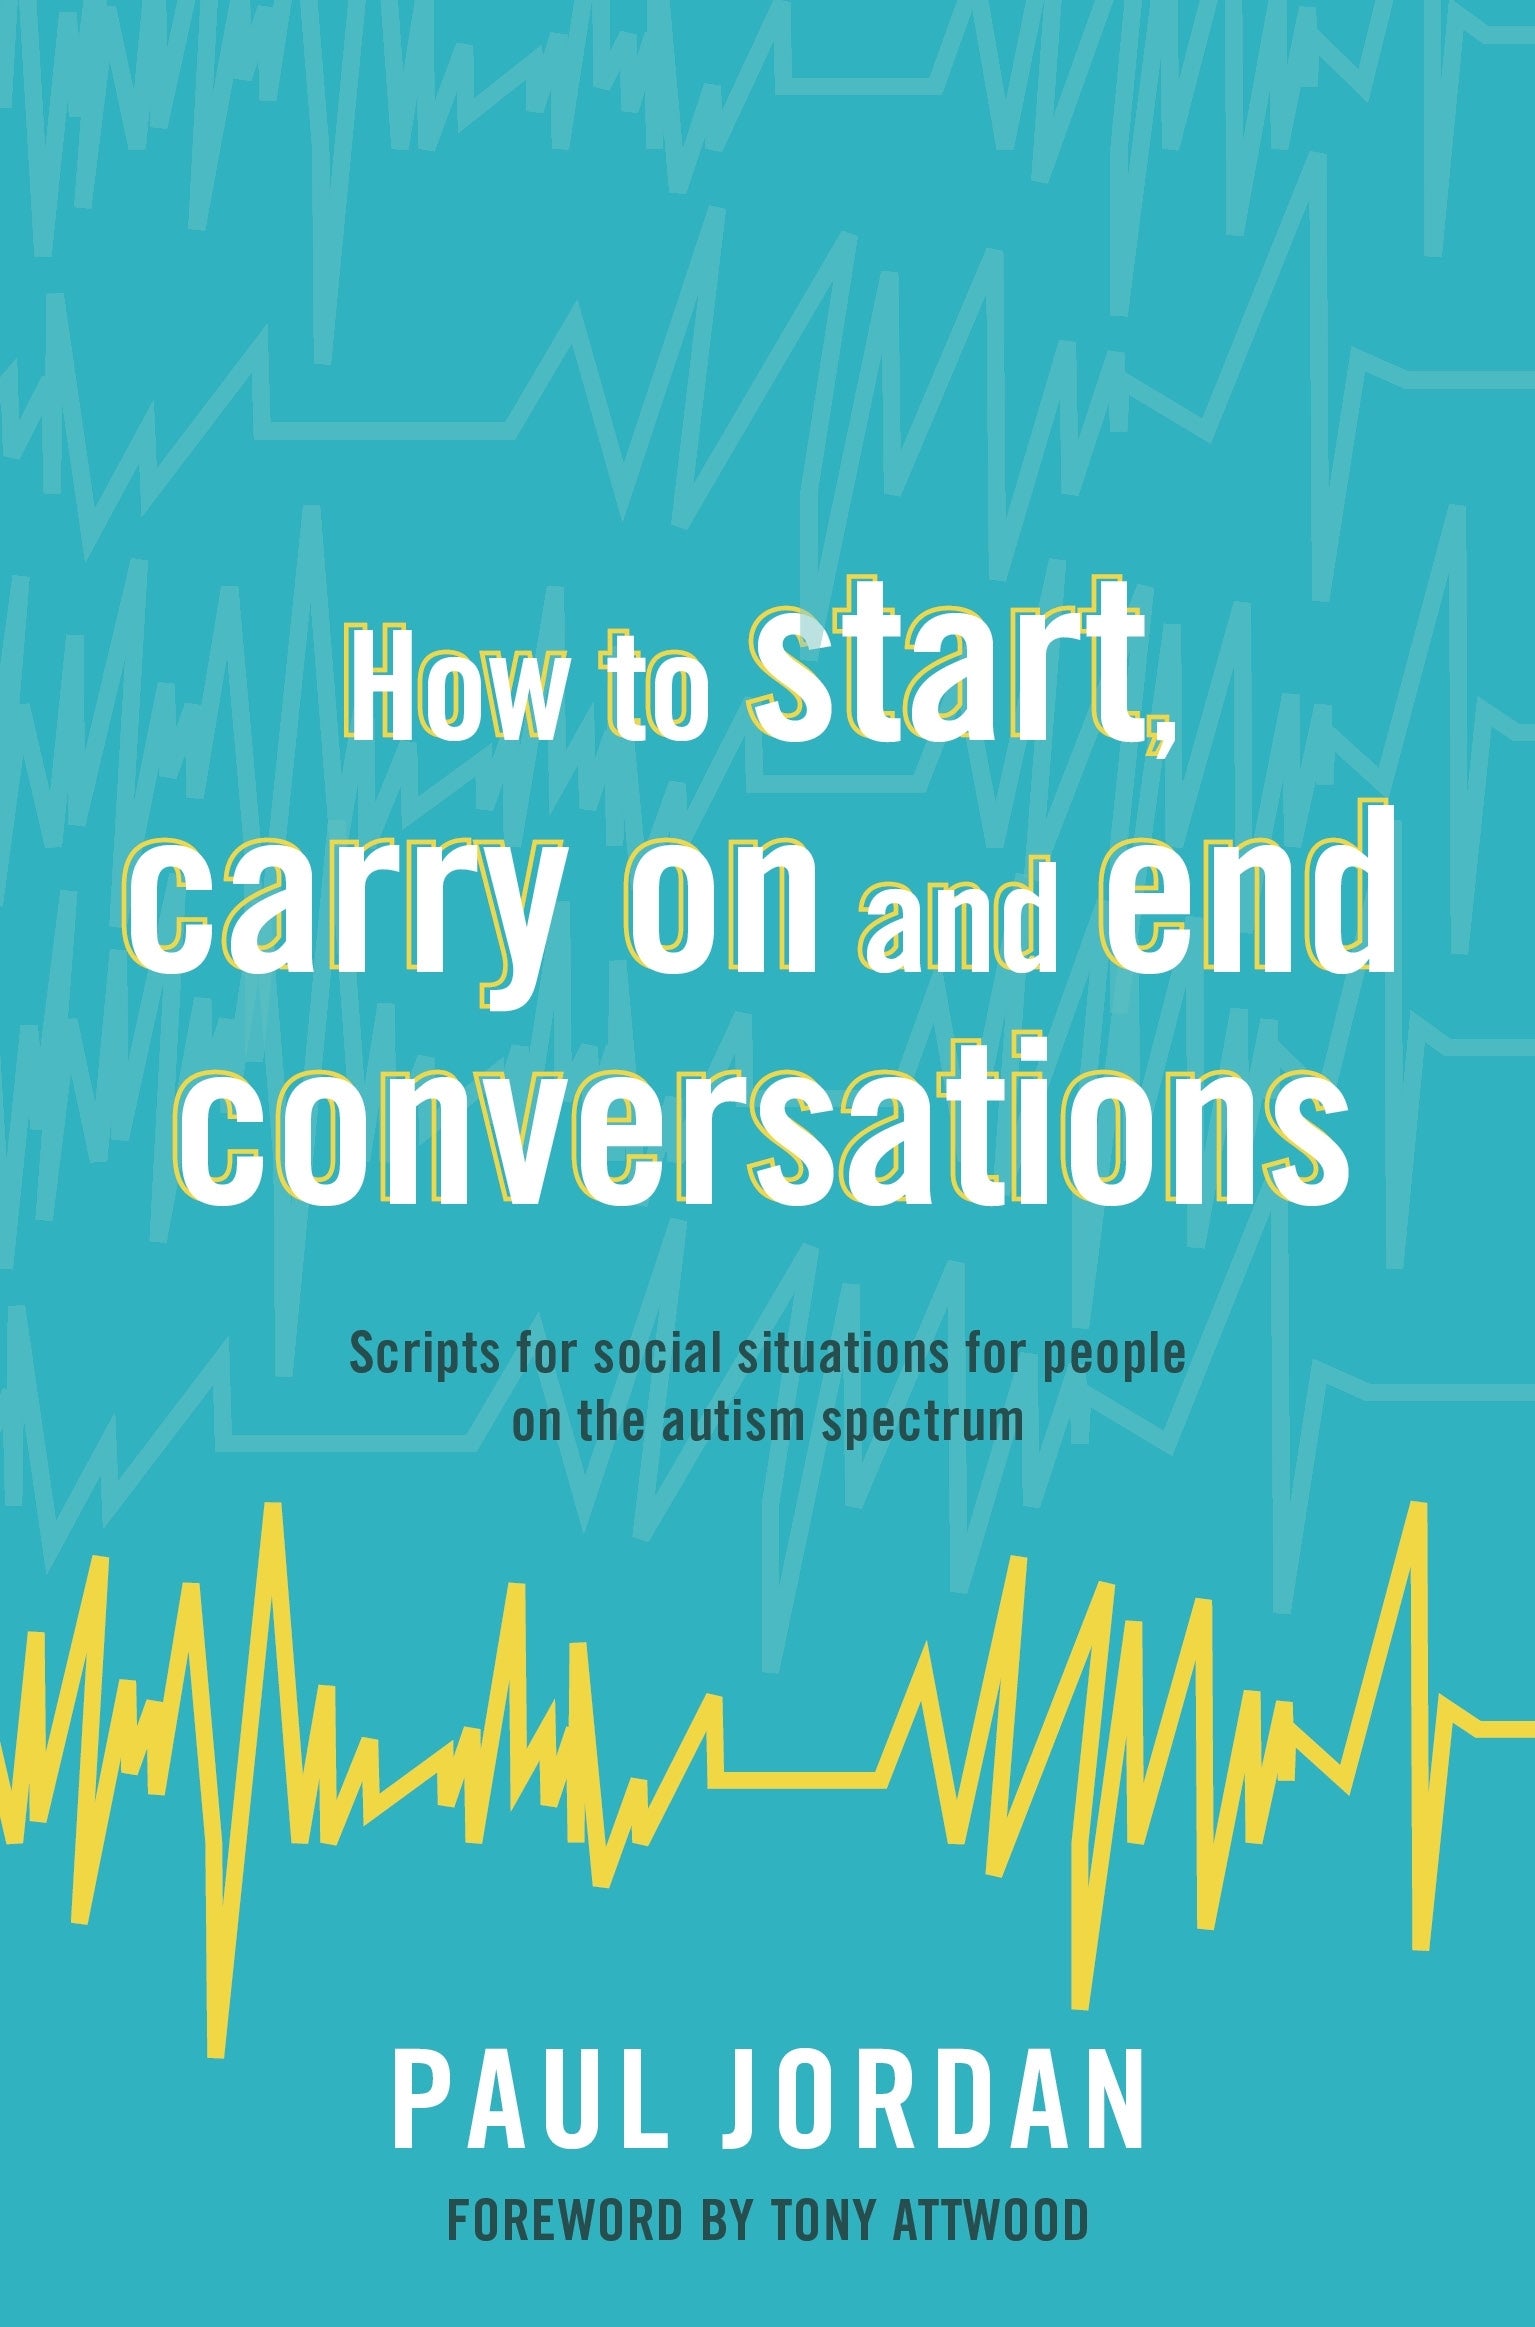 How to start, carry on and end conversations by Paul Jordan, Dr Anthony Attwood